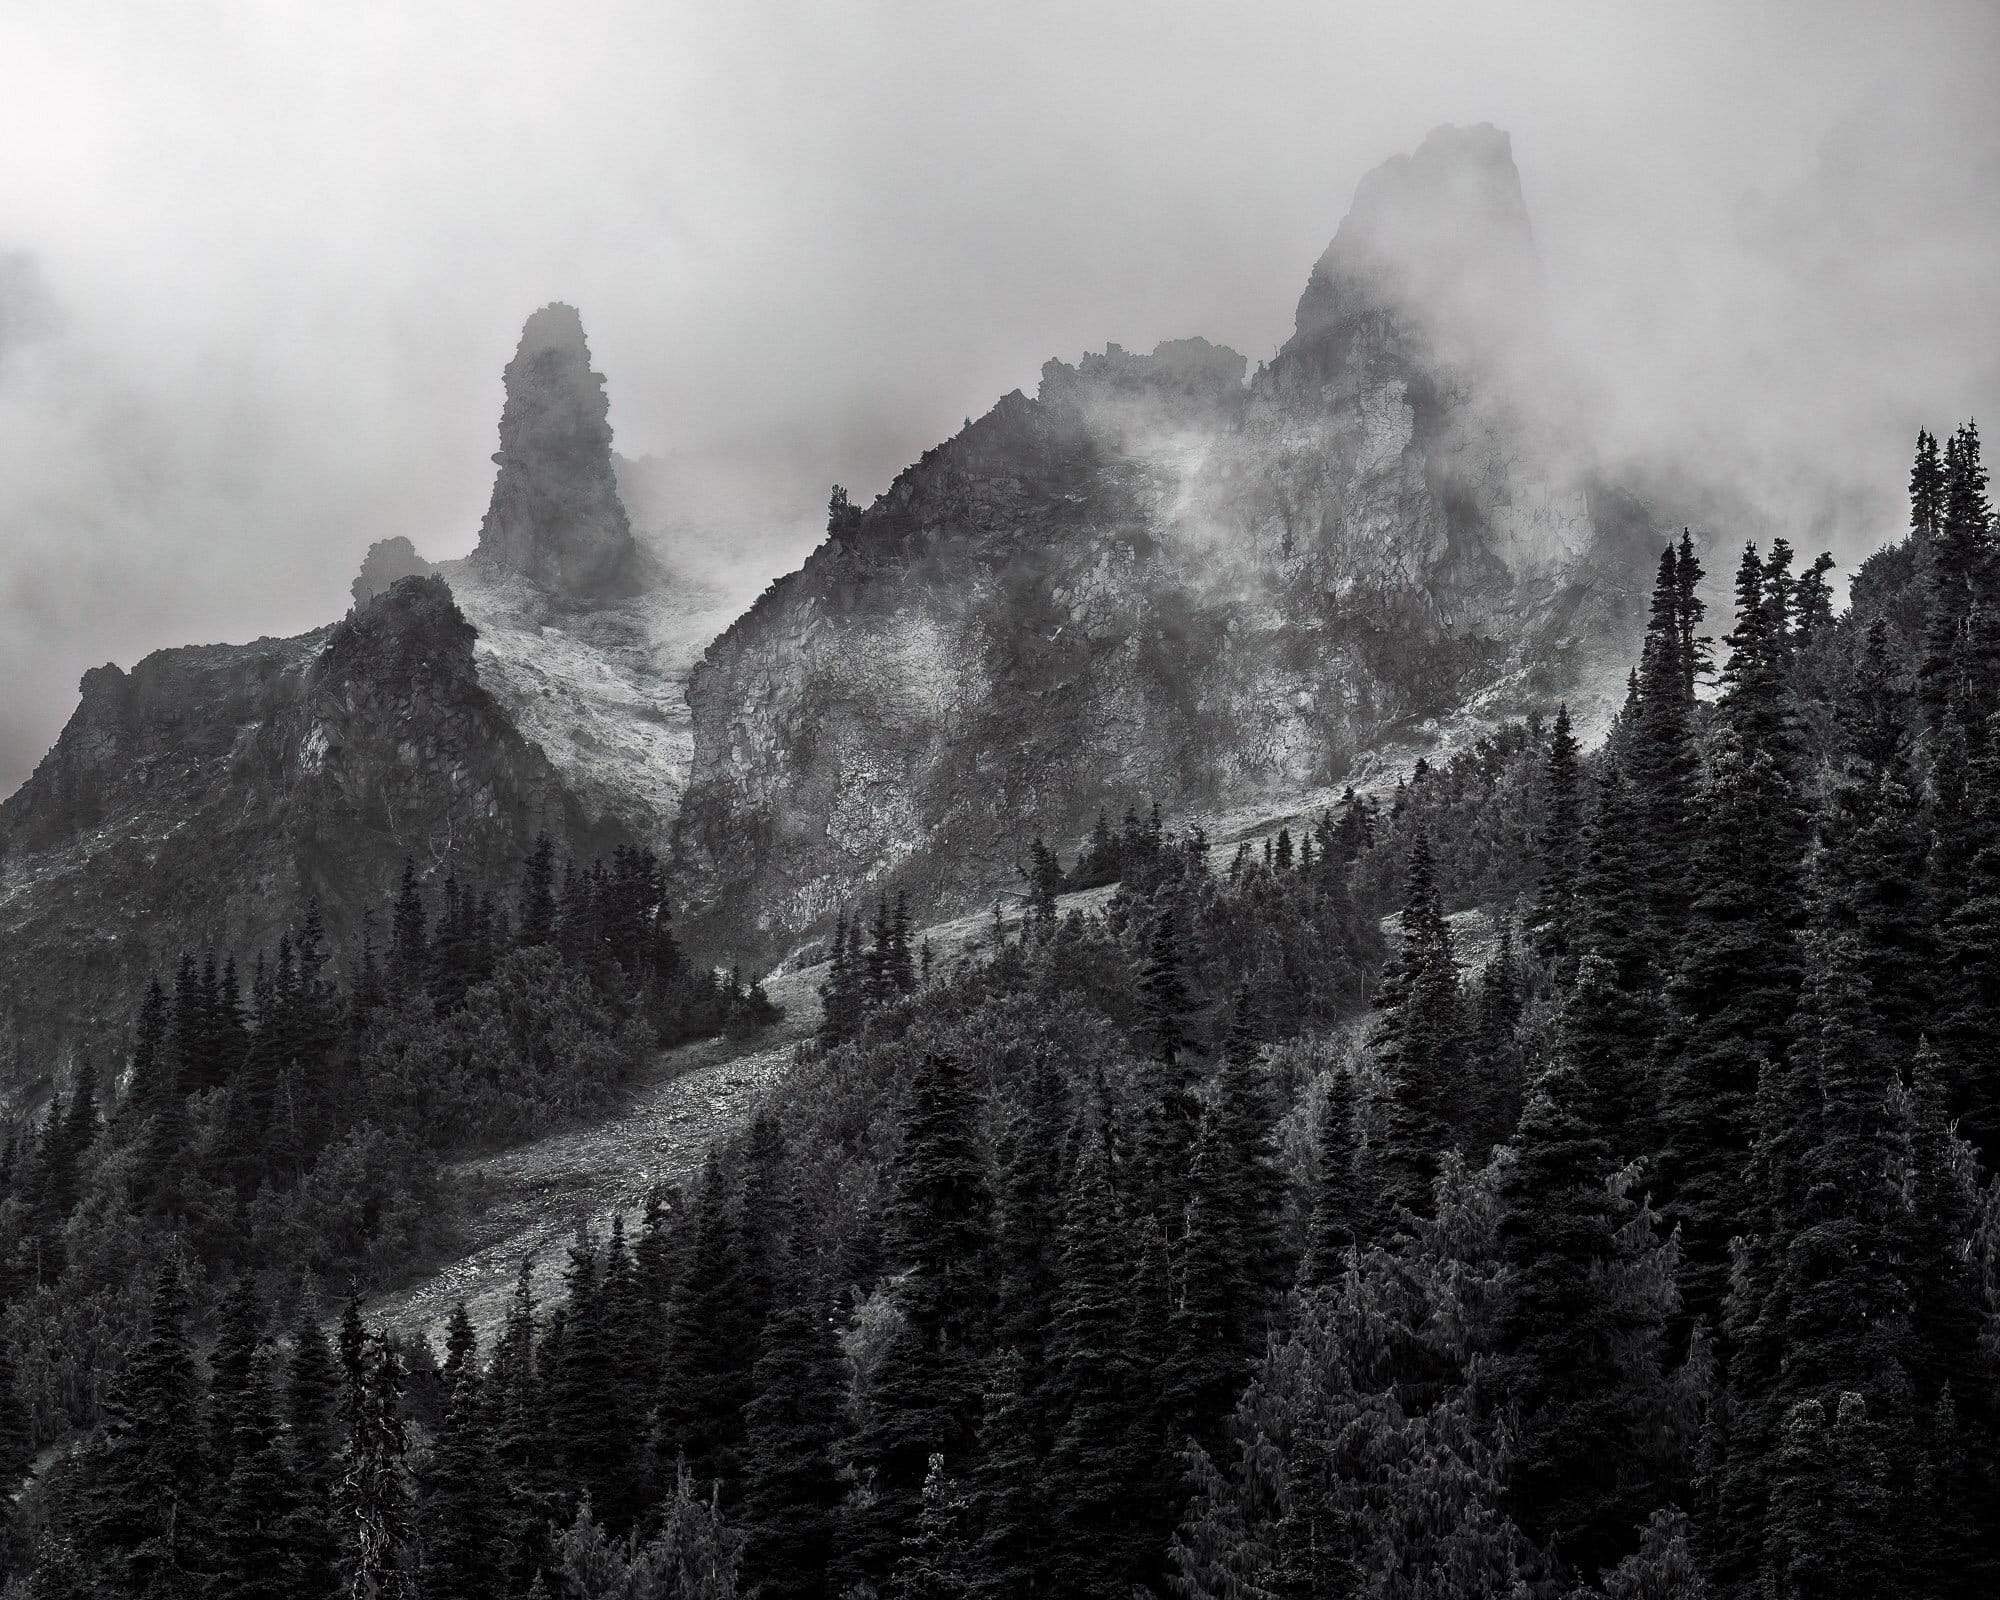 Nature's canvas in black and white. A misty veil drapes over the pinnacles below 3rd Burroughs Mountain, as captured in this landscape photograph from the Glacier Basin Trail in Mt. Rainier National Park, Washington.